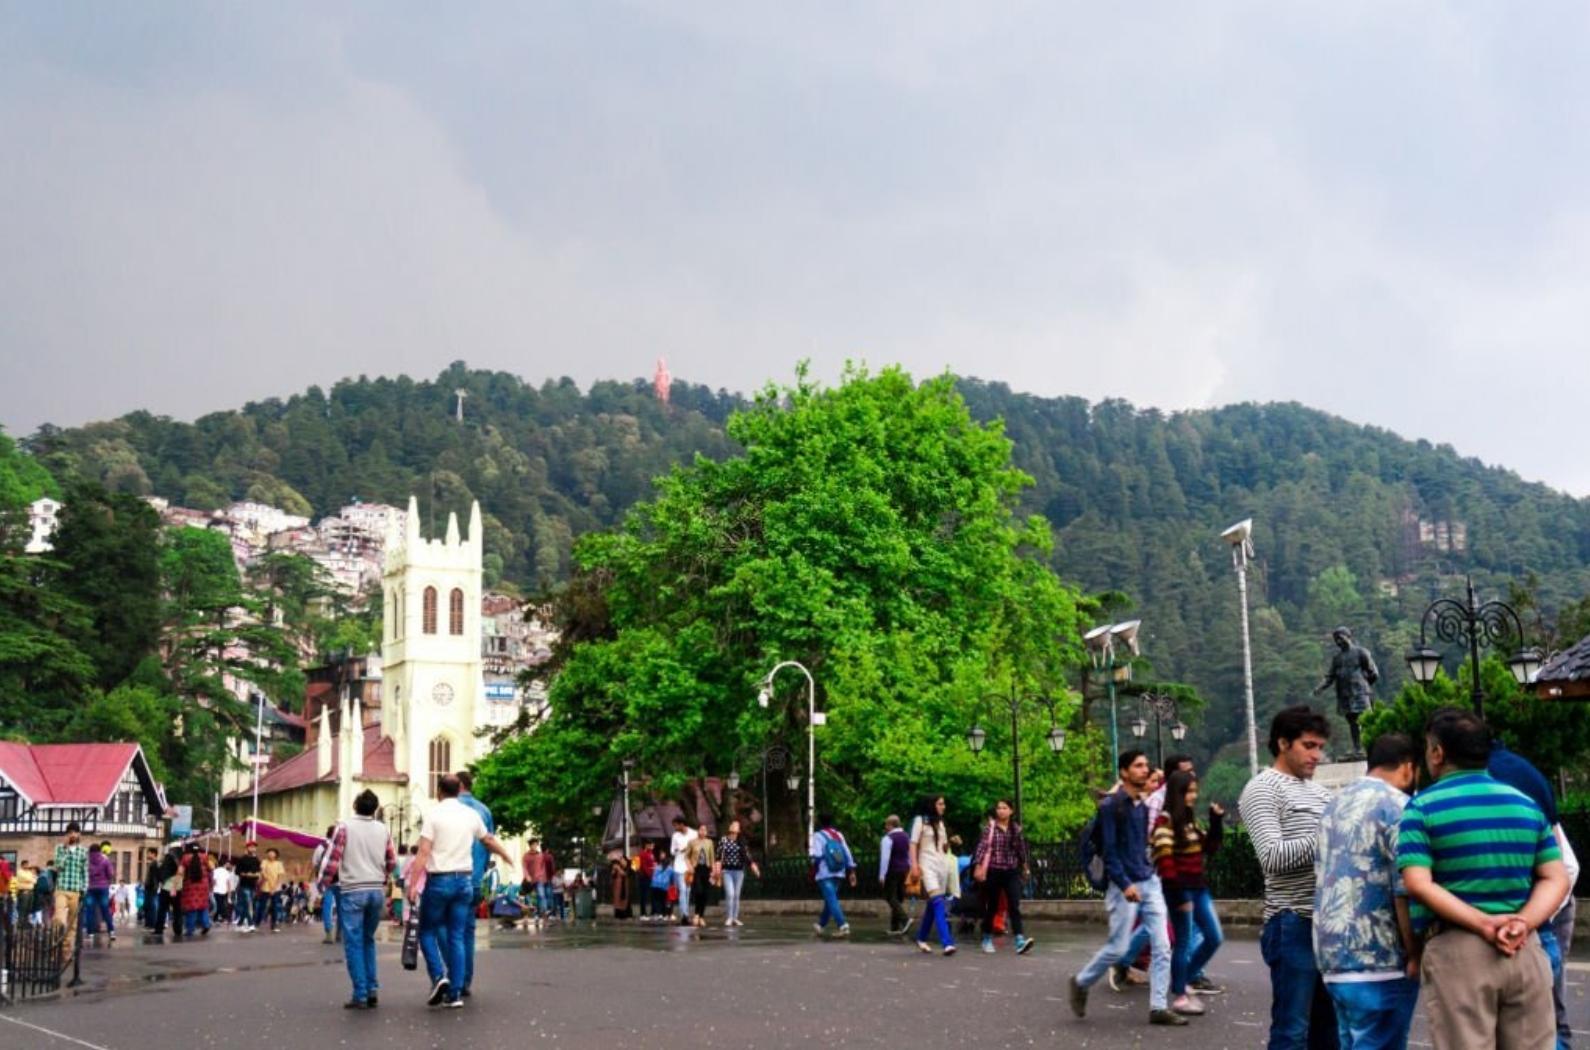 People roaming around on the ridge in shimla with the christ church in the background.